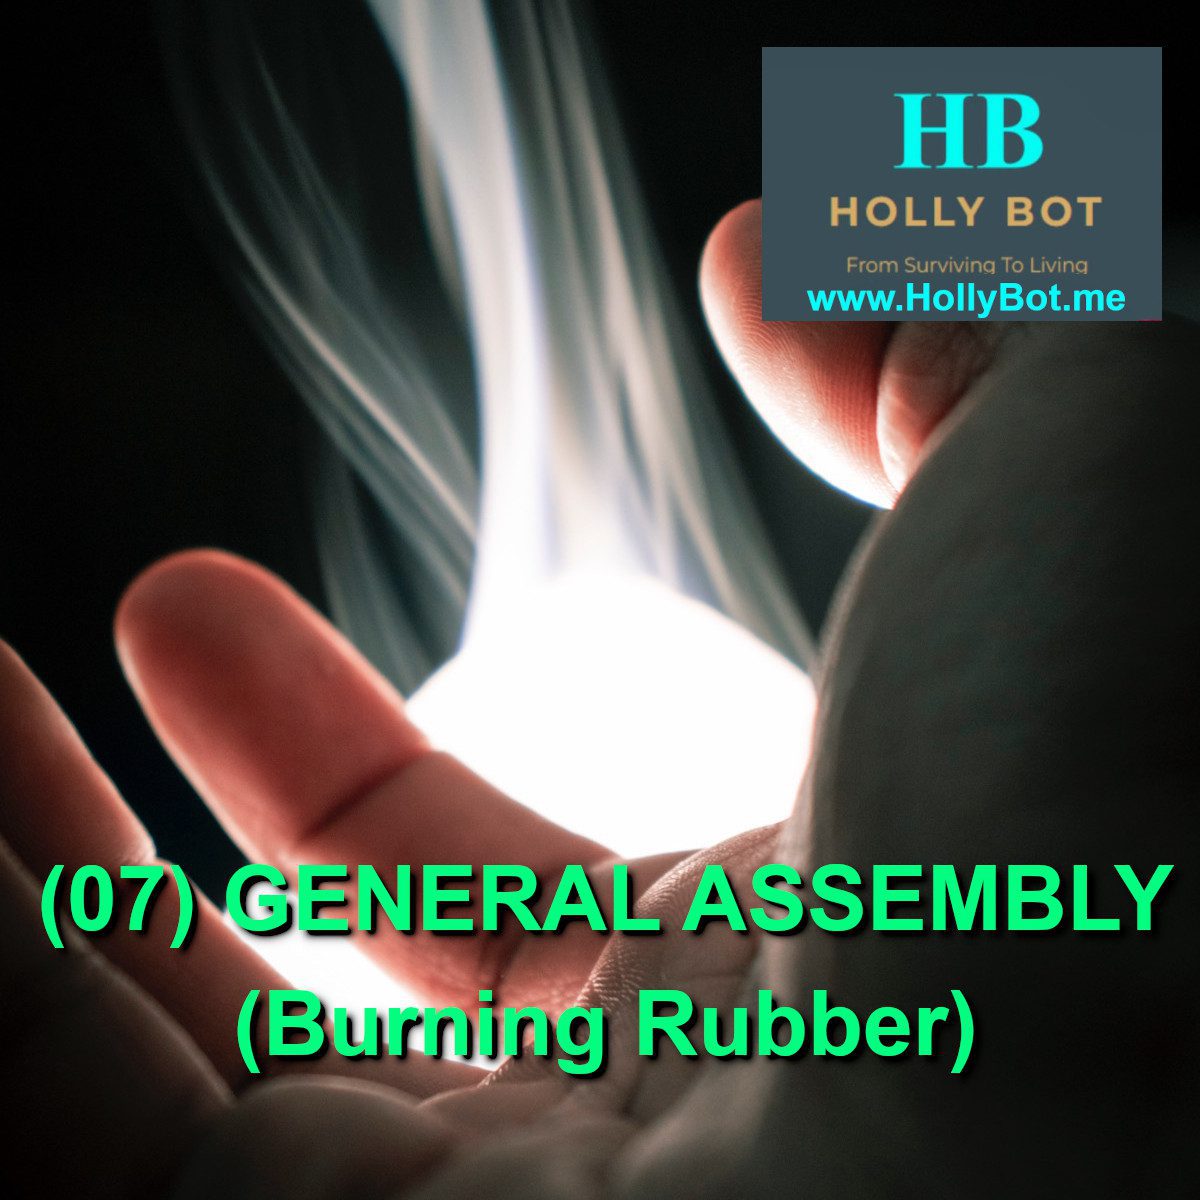 (07) GENERAL ASSEMBLY (Burning Rubber)